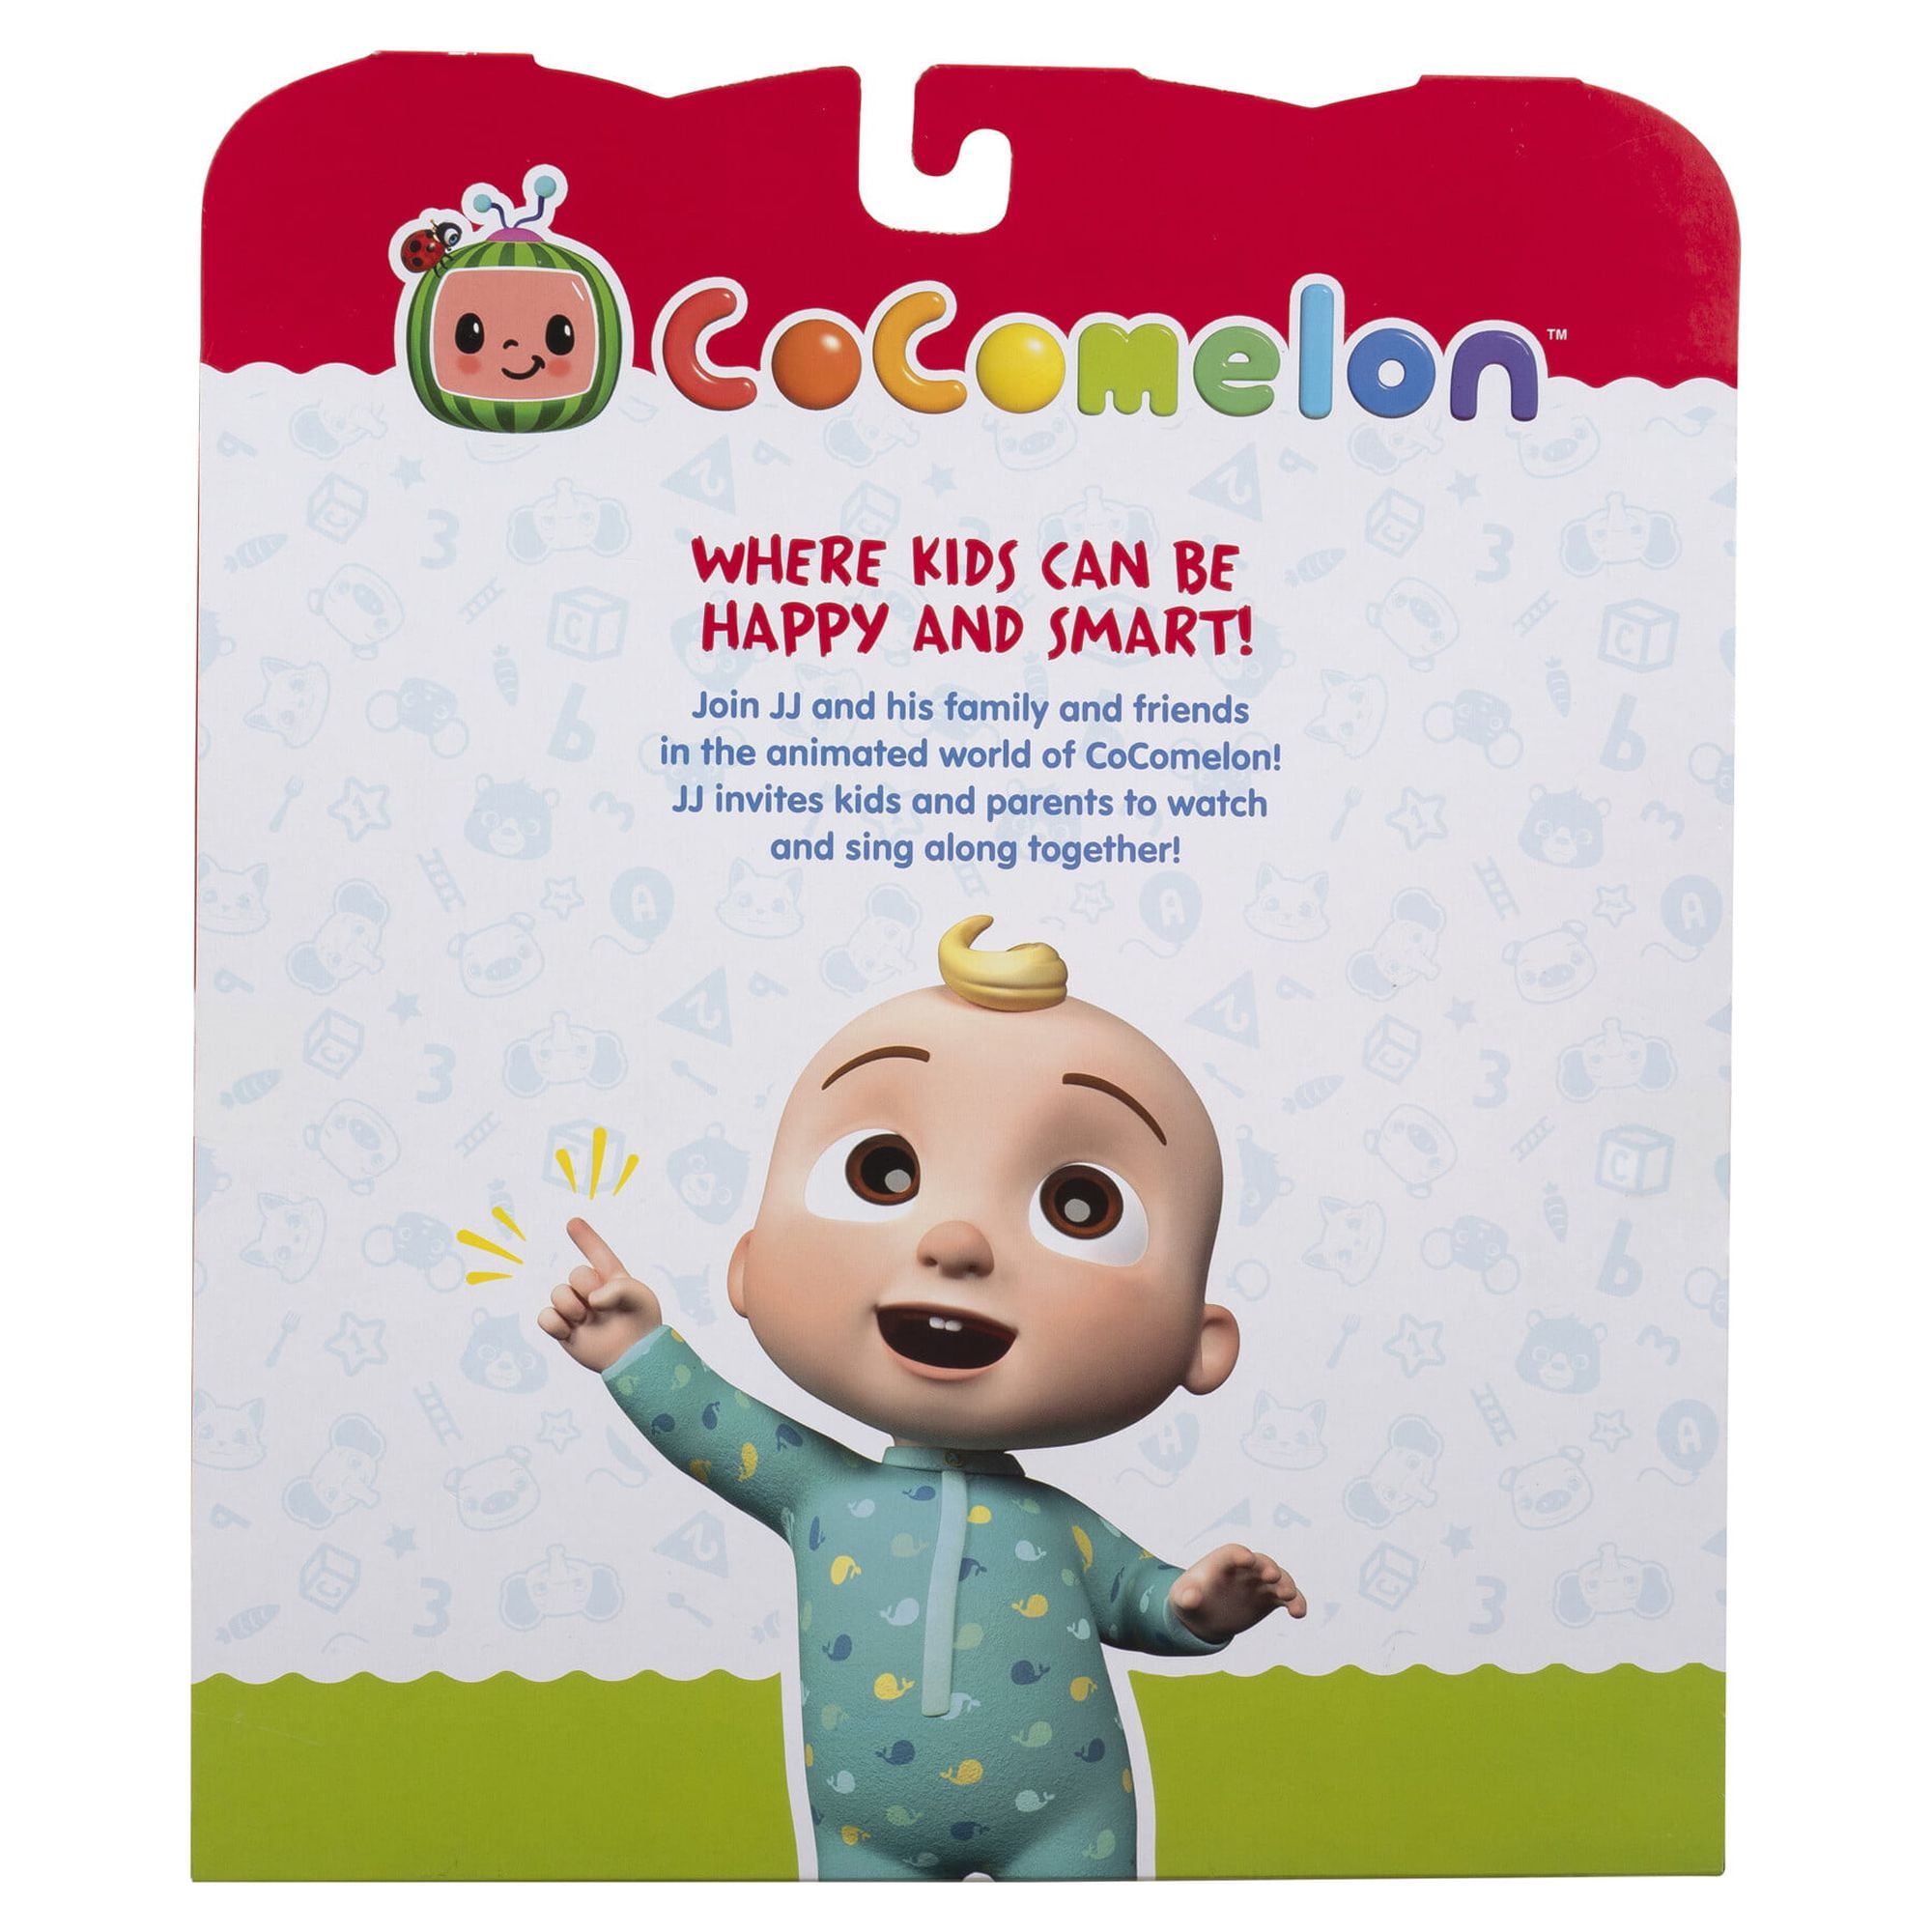 COCOMELON's Love, Kindness Promotes Family-Friendly Values